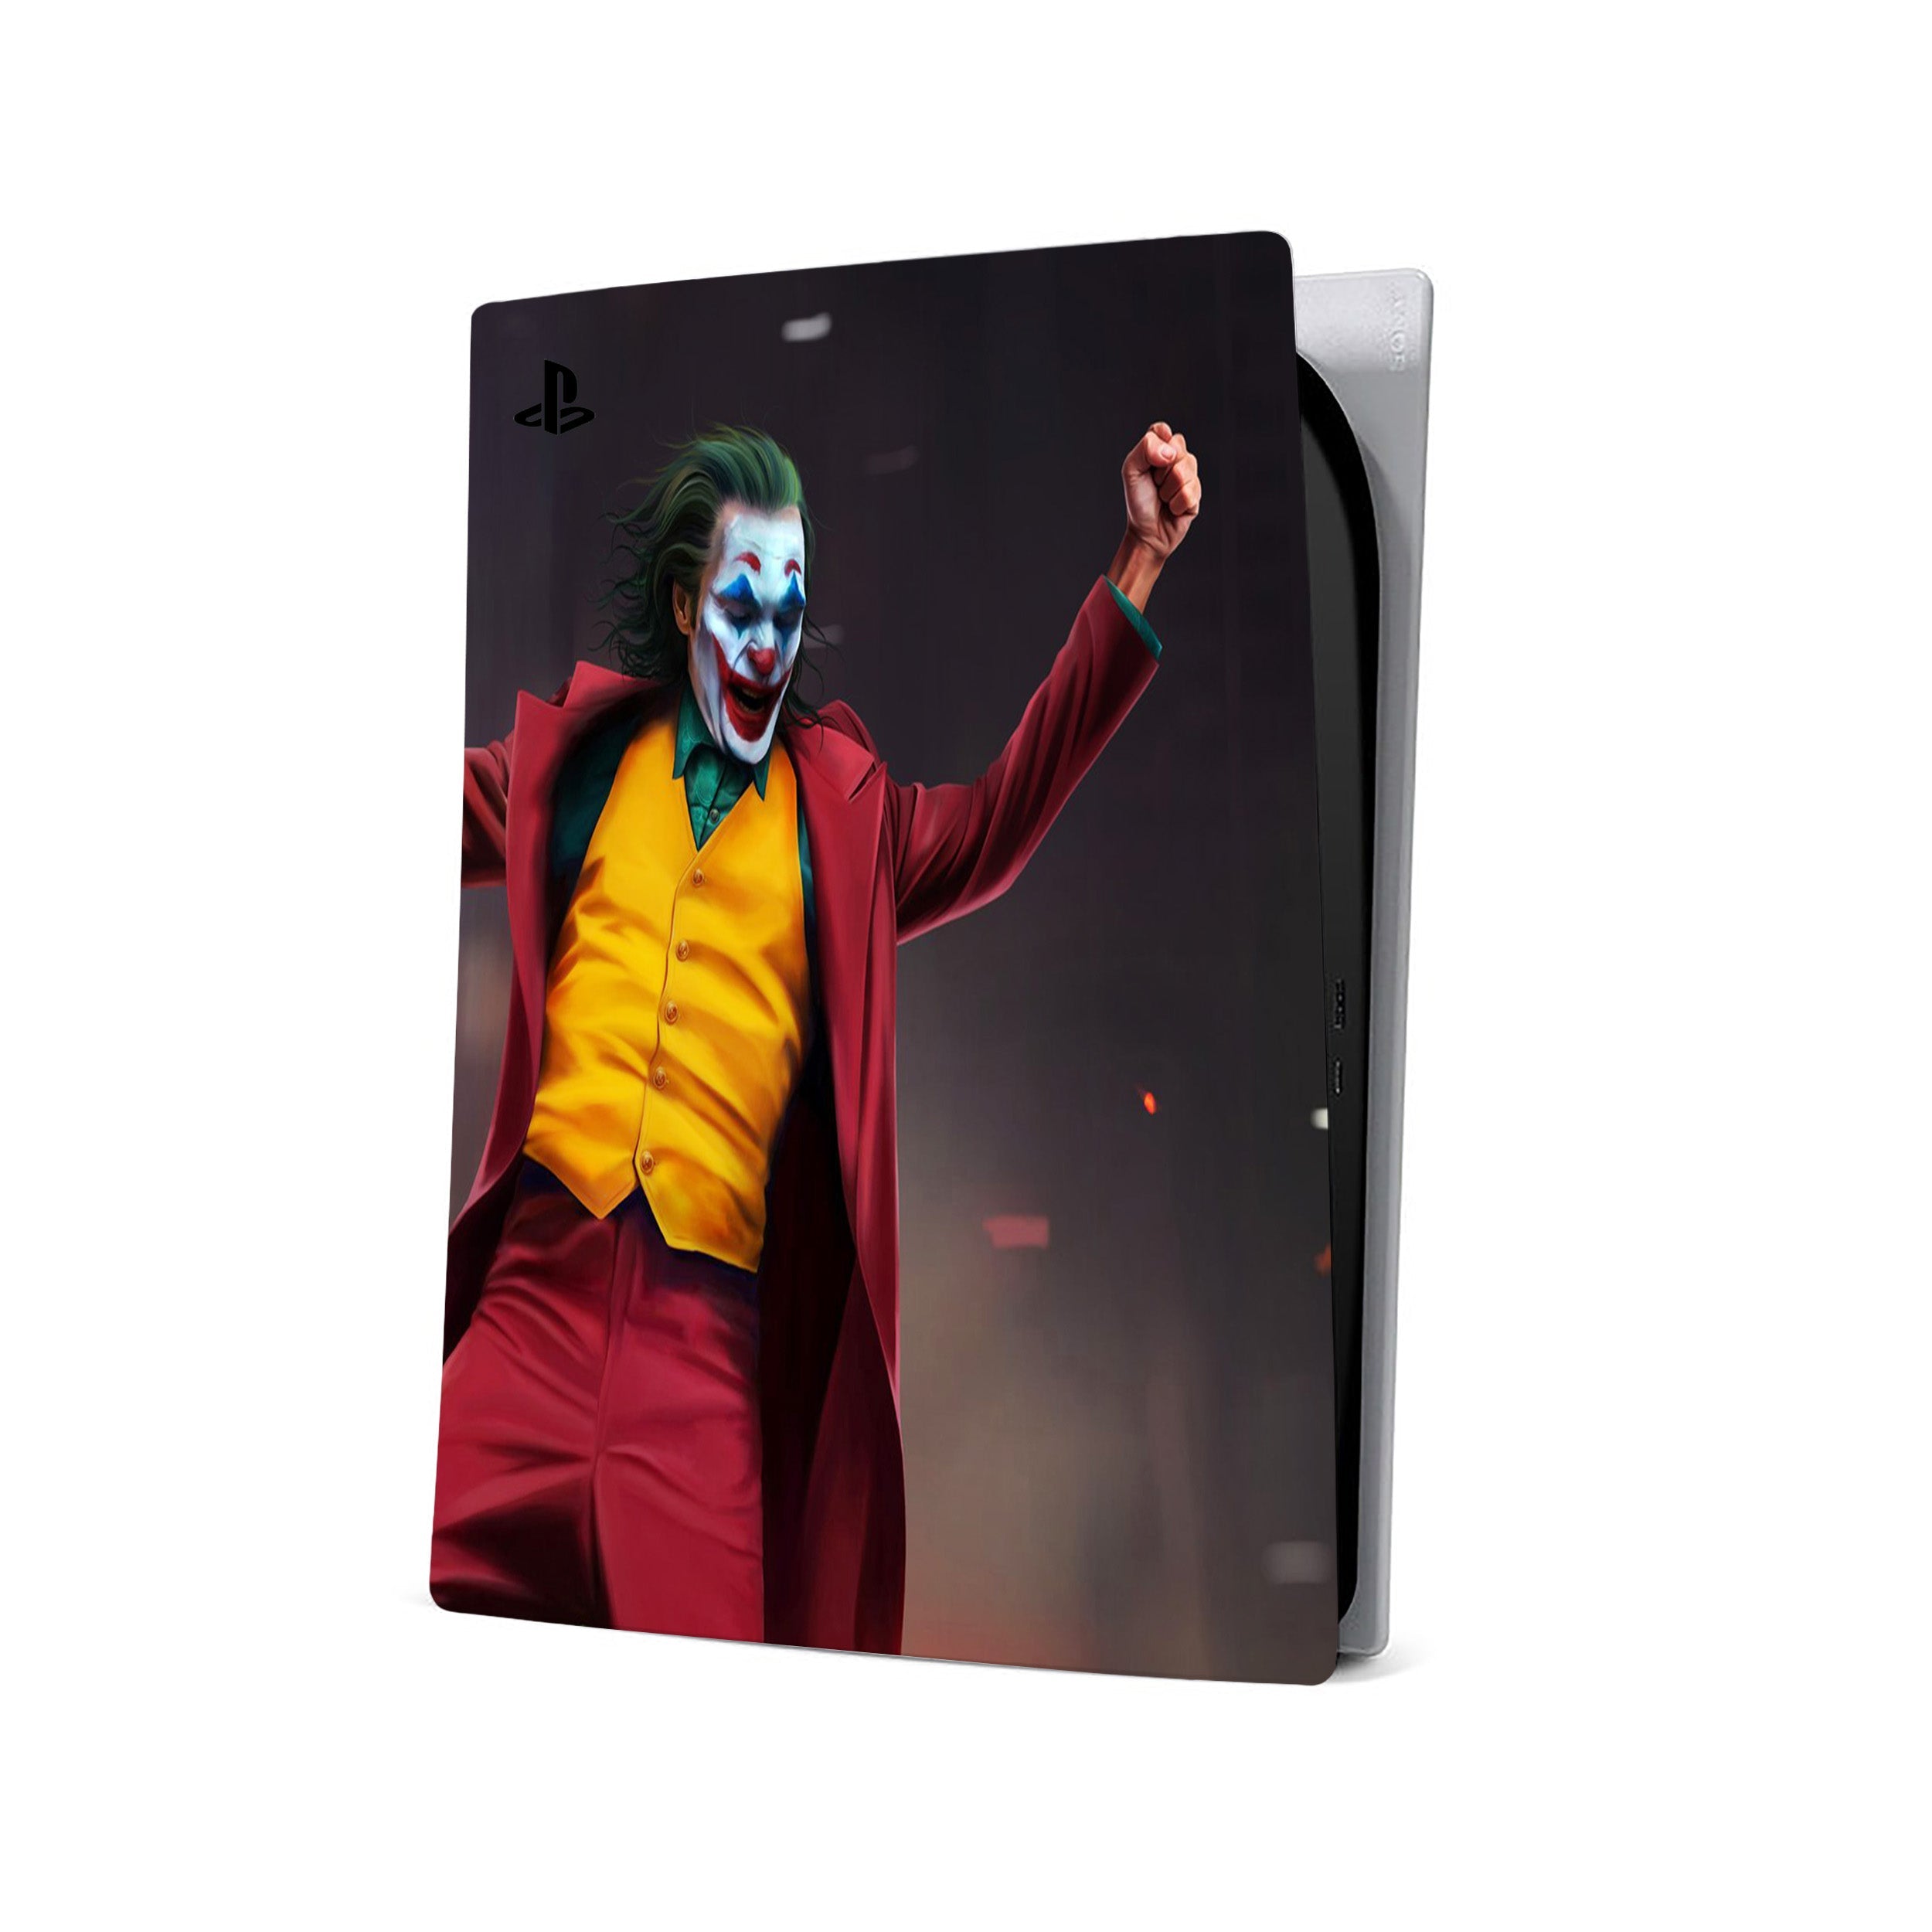 A video game skin featuring a DC Comics Joker design for the PS5.